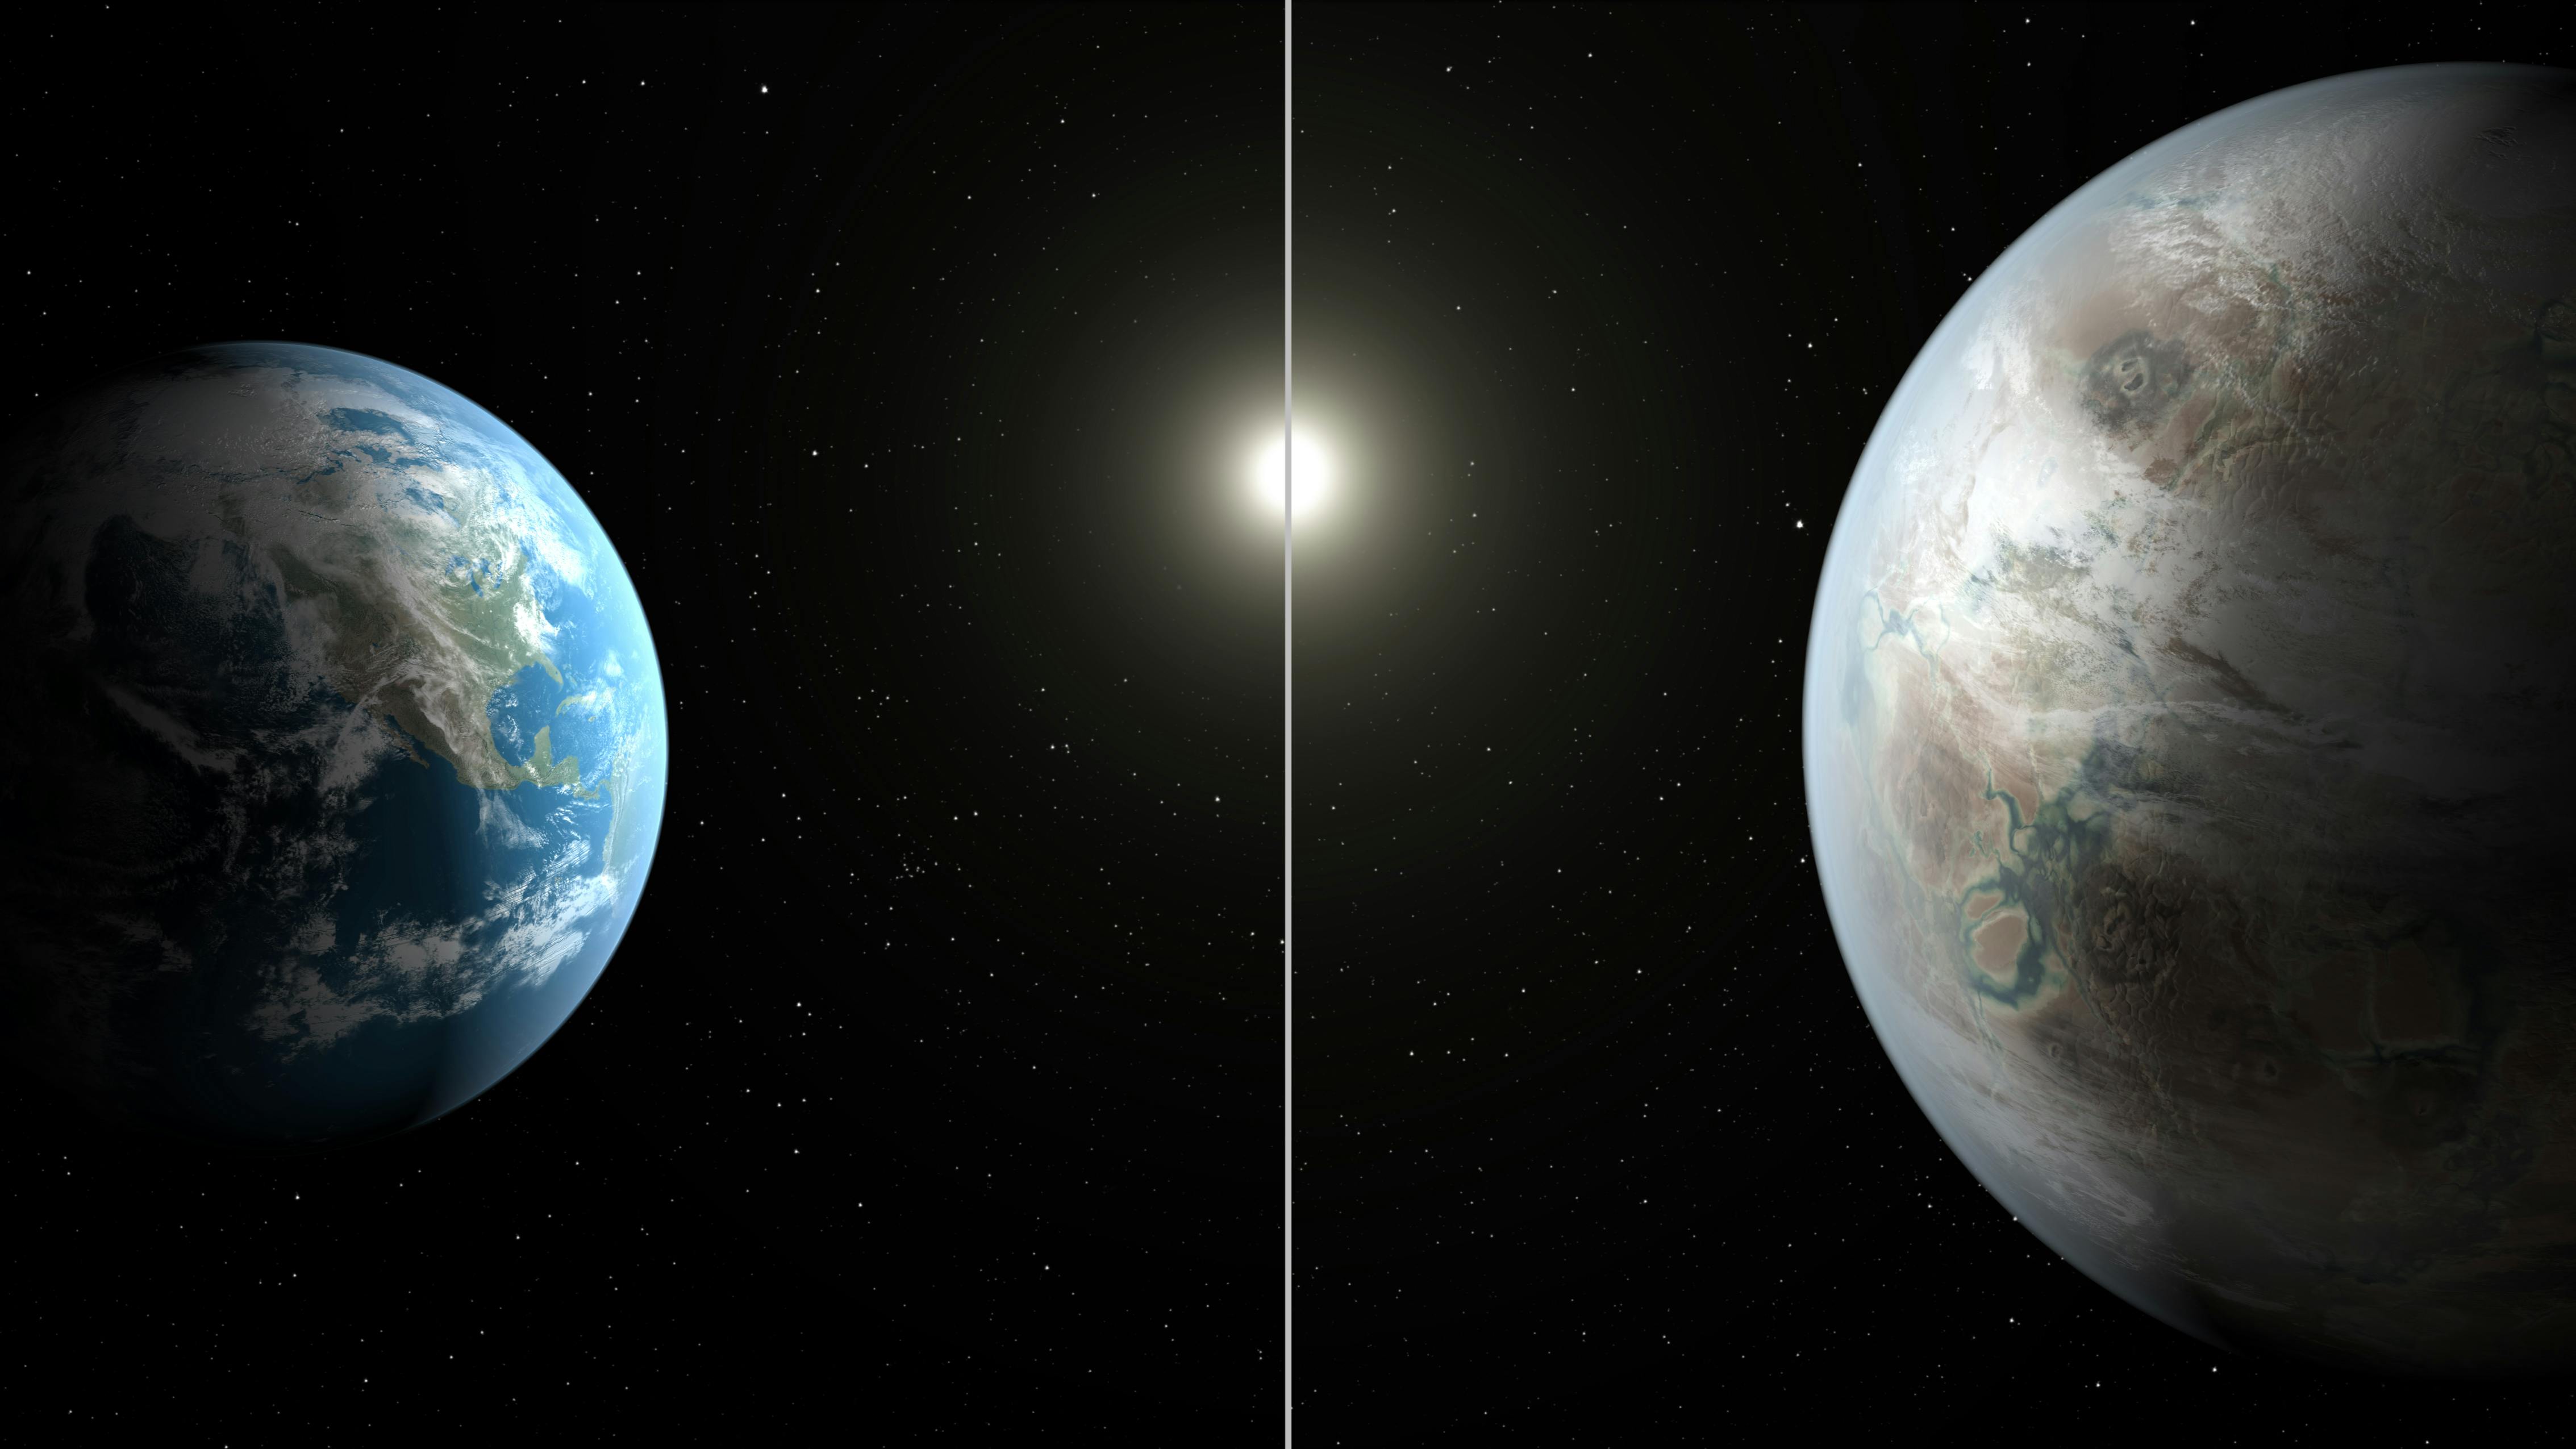 Artist's rendering of Kepler-452b and its star compared to Earth and our sun